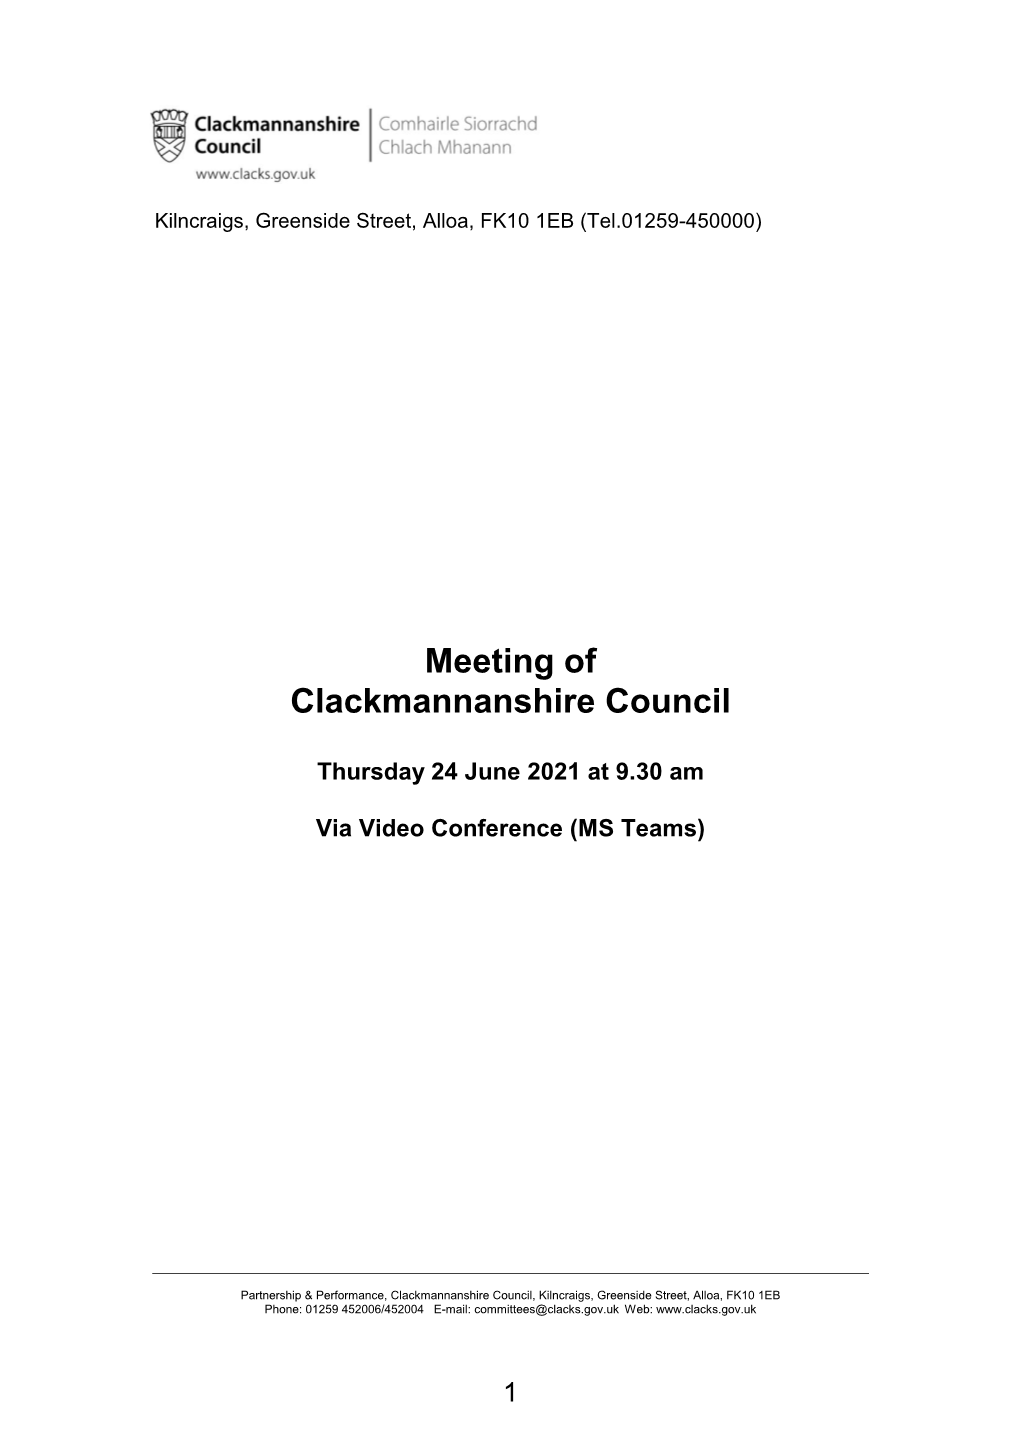 Agenda for Meeting of Clackmannanshire